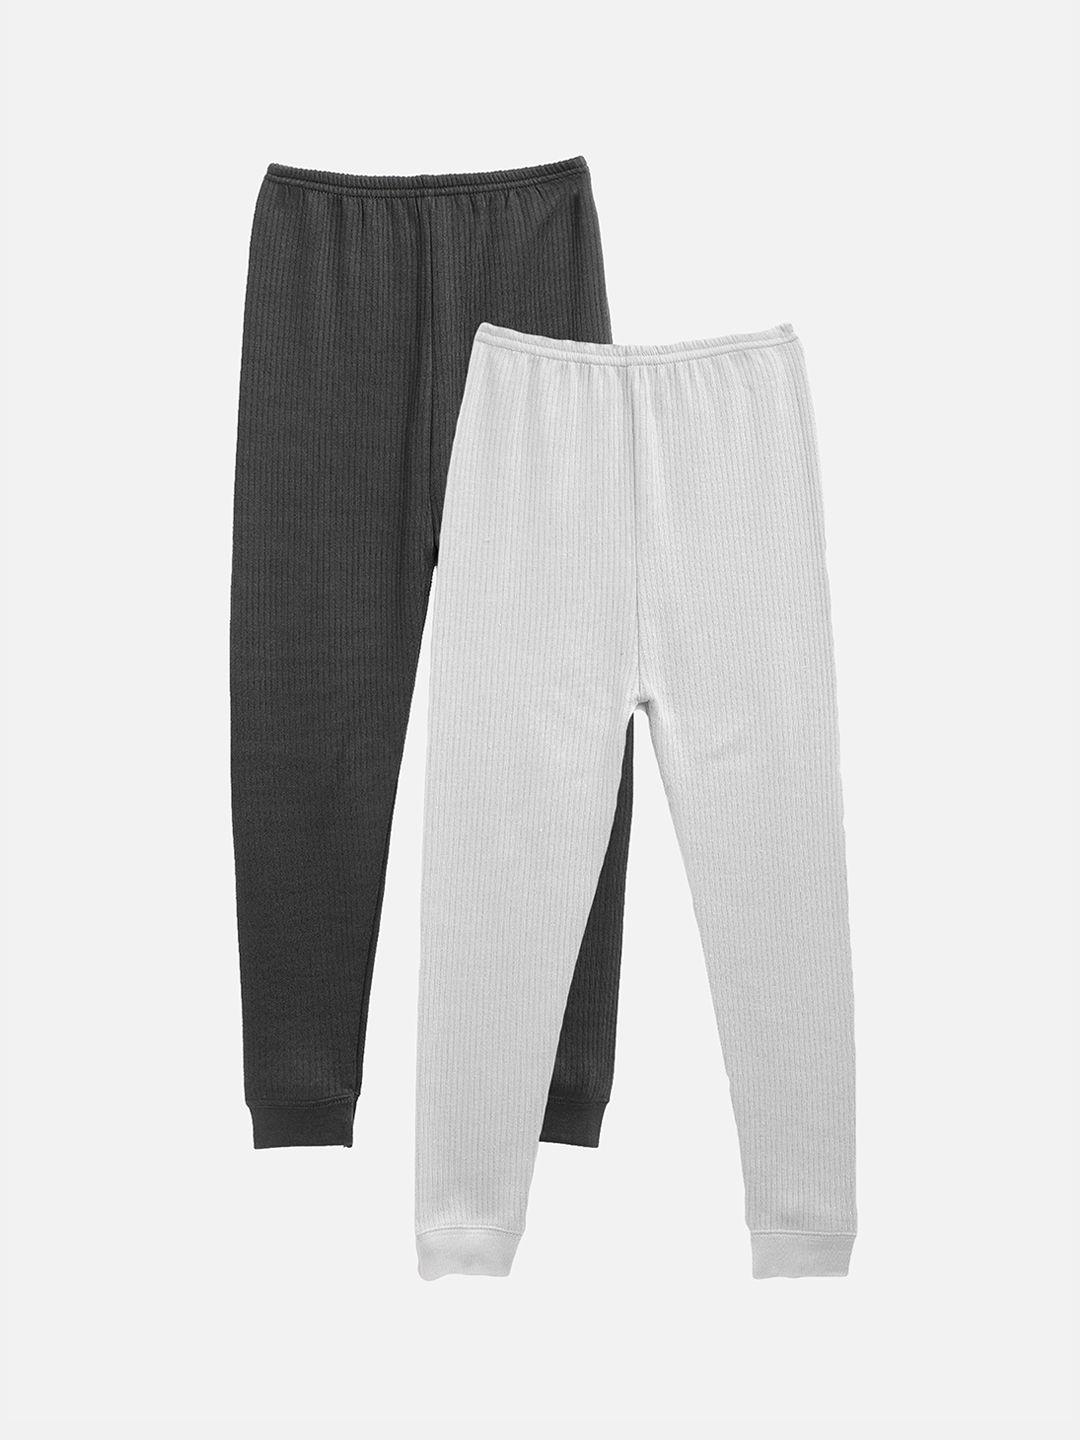 kanvin pack of 2 charcoal & grey boys charcoal thermal bottoms